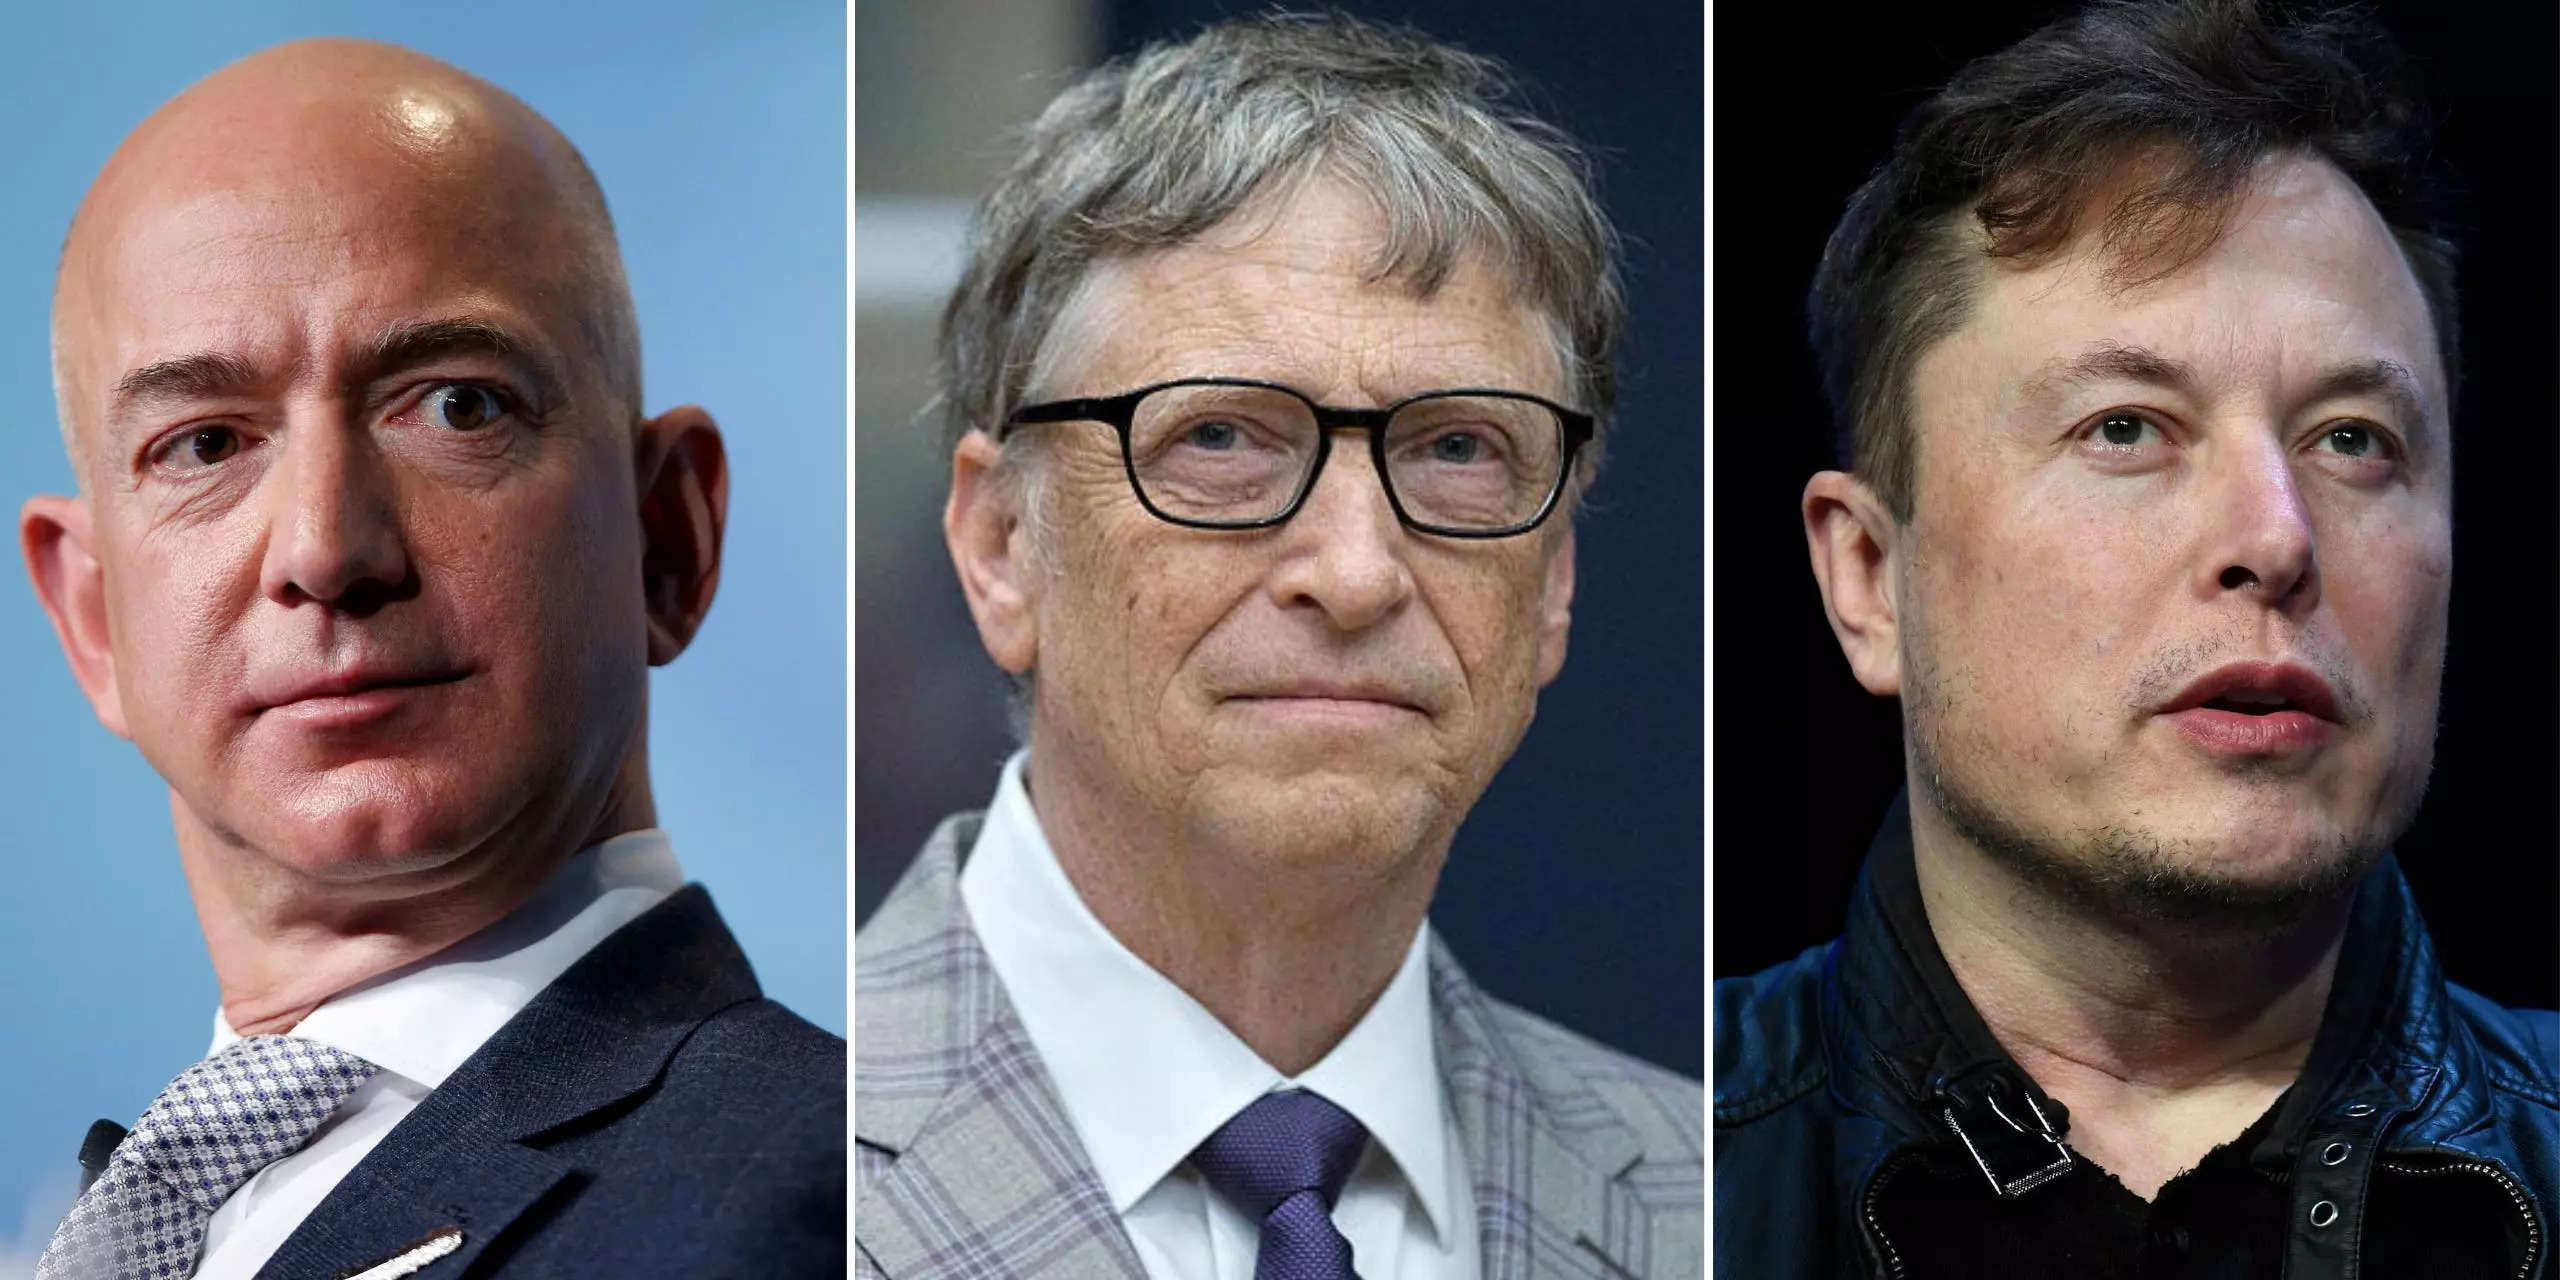 The world's 5 richest tech tycoons &mdash; including Elon Musk, Jeff Bezos, and Bill Gates &mdash; have already lost about $85 billion this year amid a brutal market sell-off